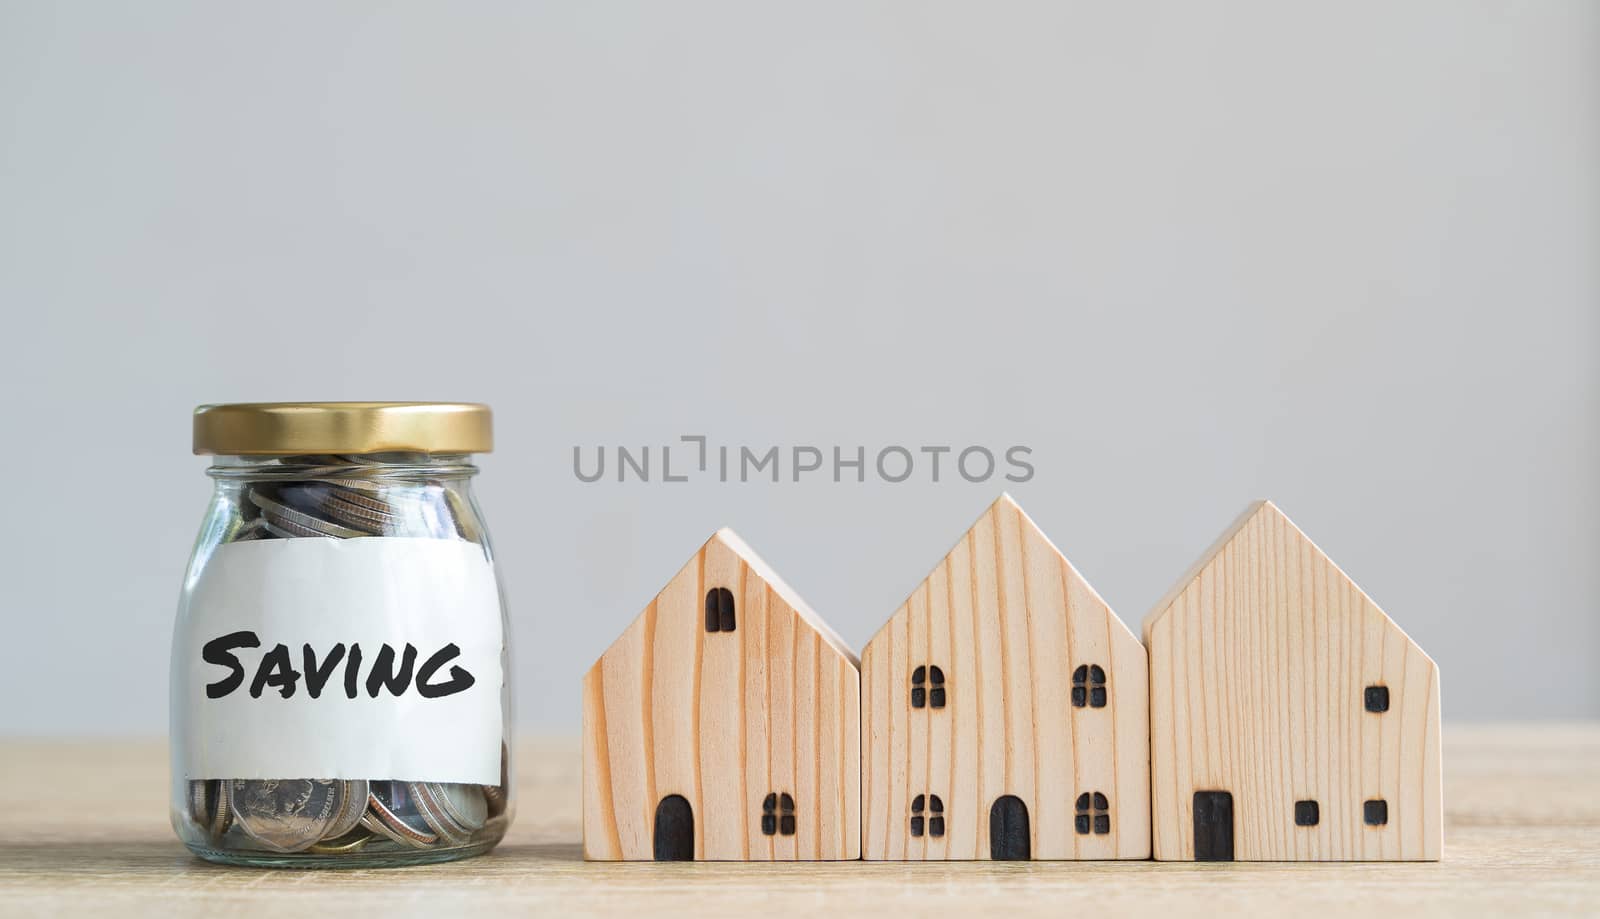 Money savings concepts. Wooden house models with coins in bottle and saving label meaning about saving money to buy a house, refinancing, investment or financial on wooden table with copy space